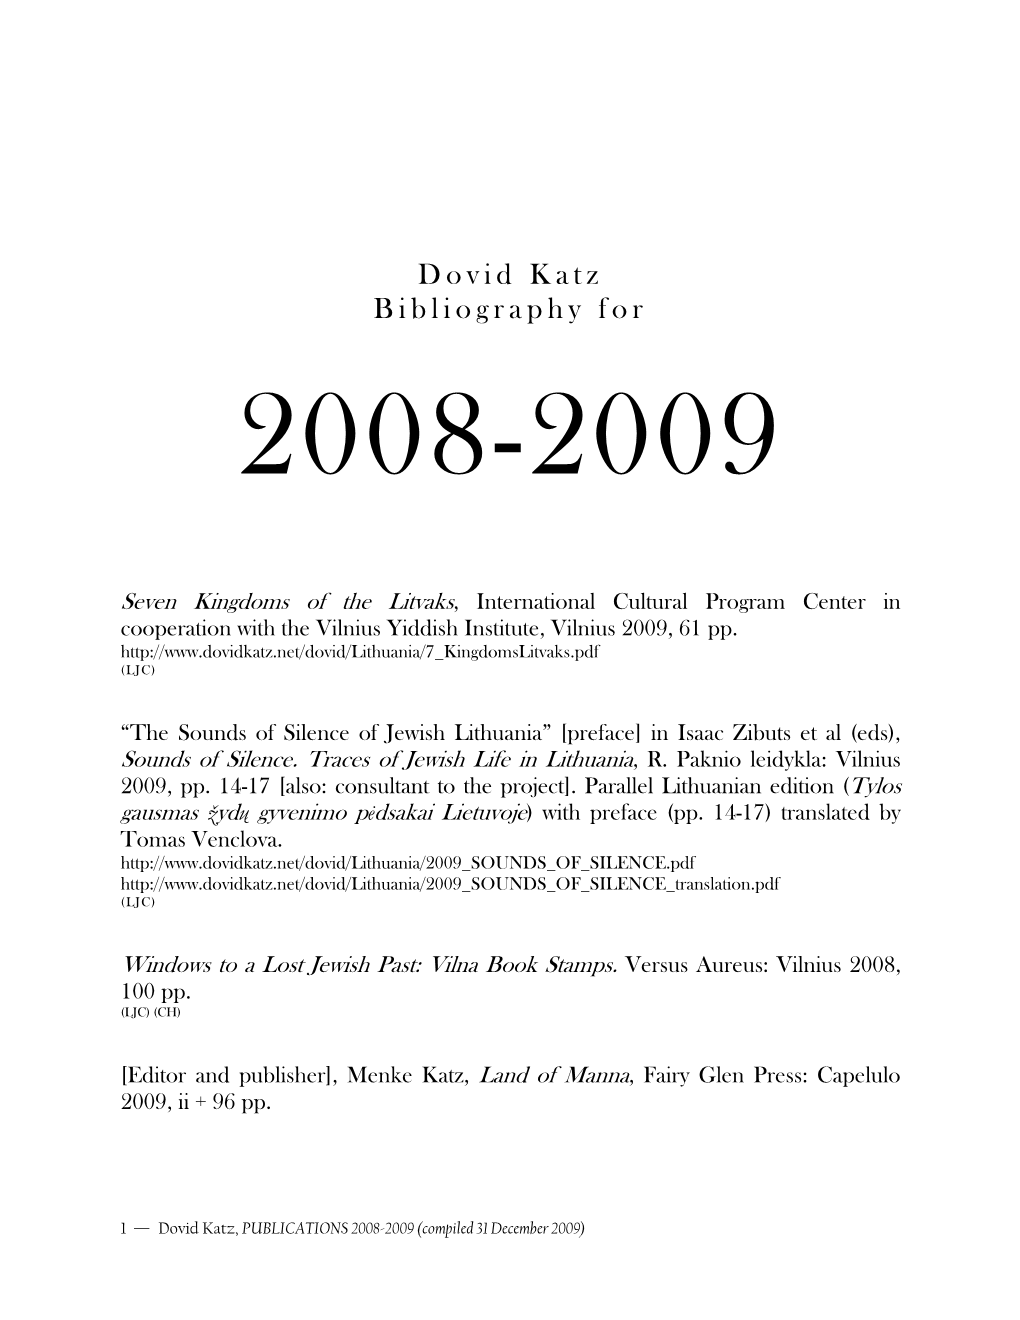 Bibliography to Early March 2007